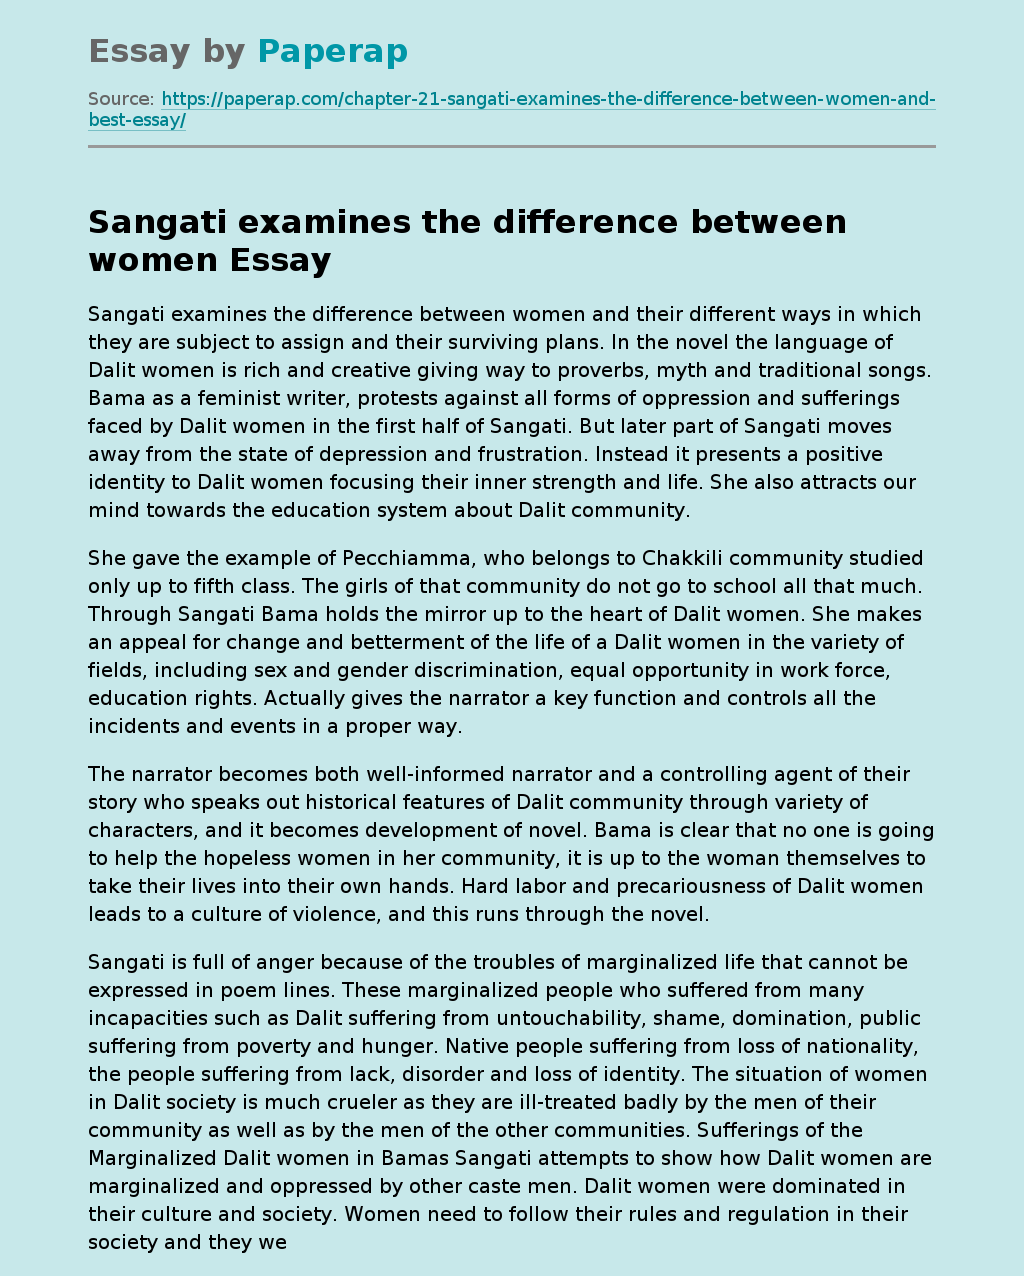 Sangati examines the difference between women